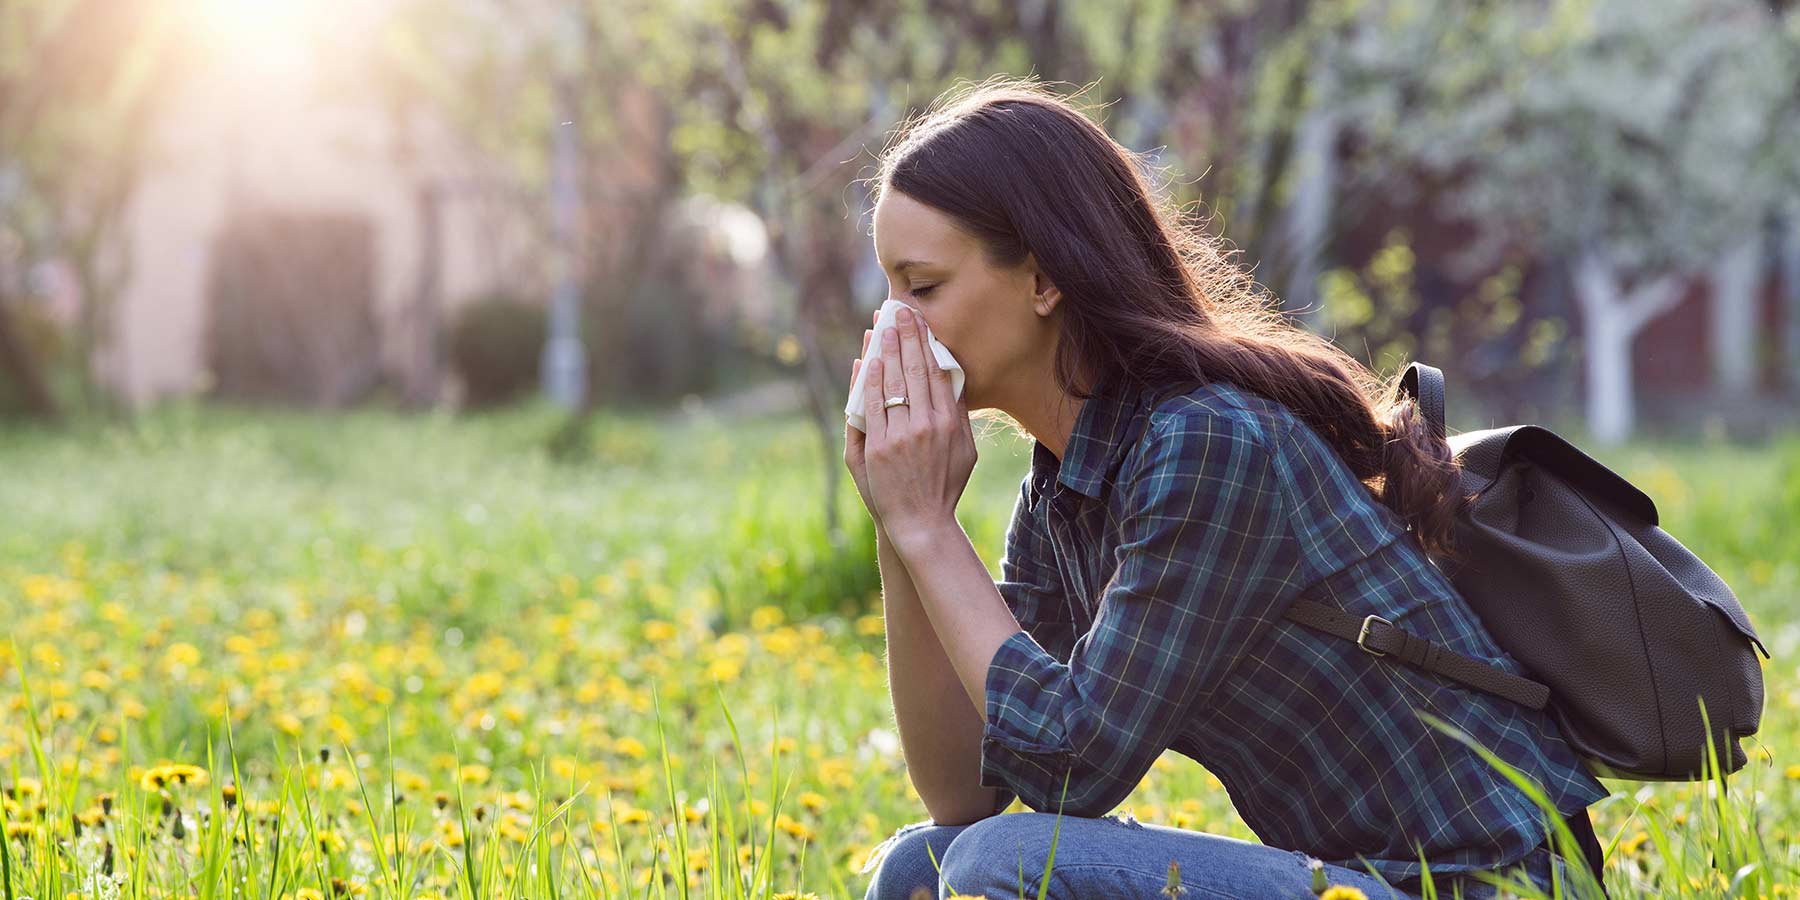 Tooth Pain Related to Allergies